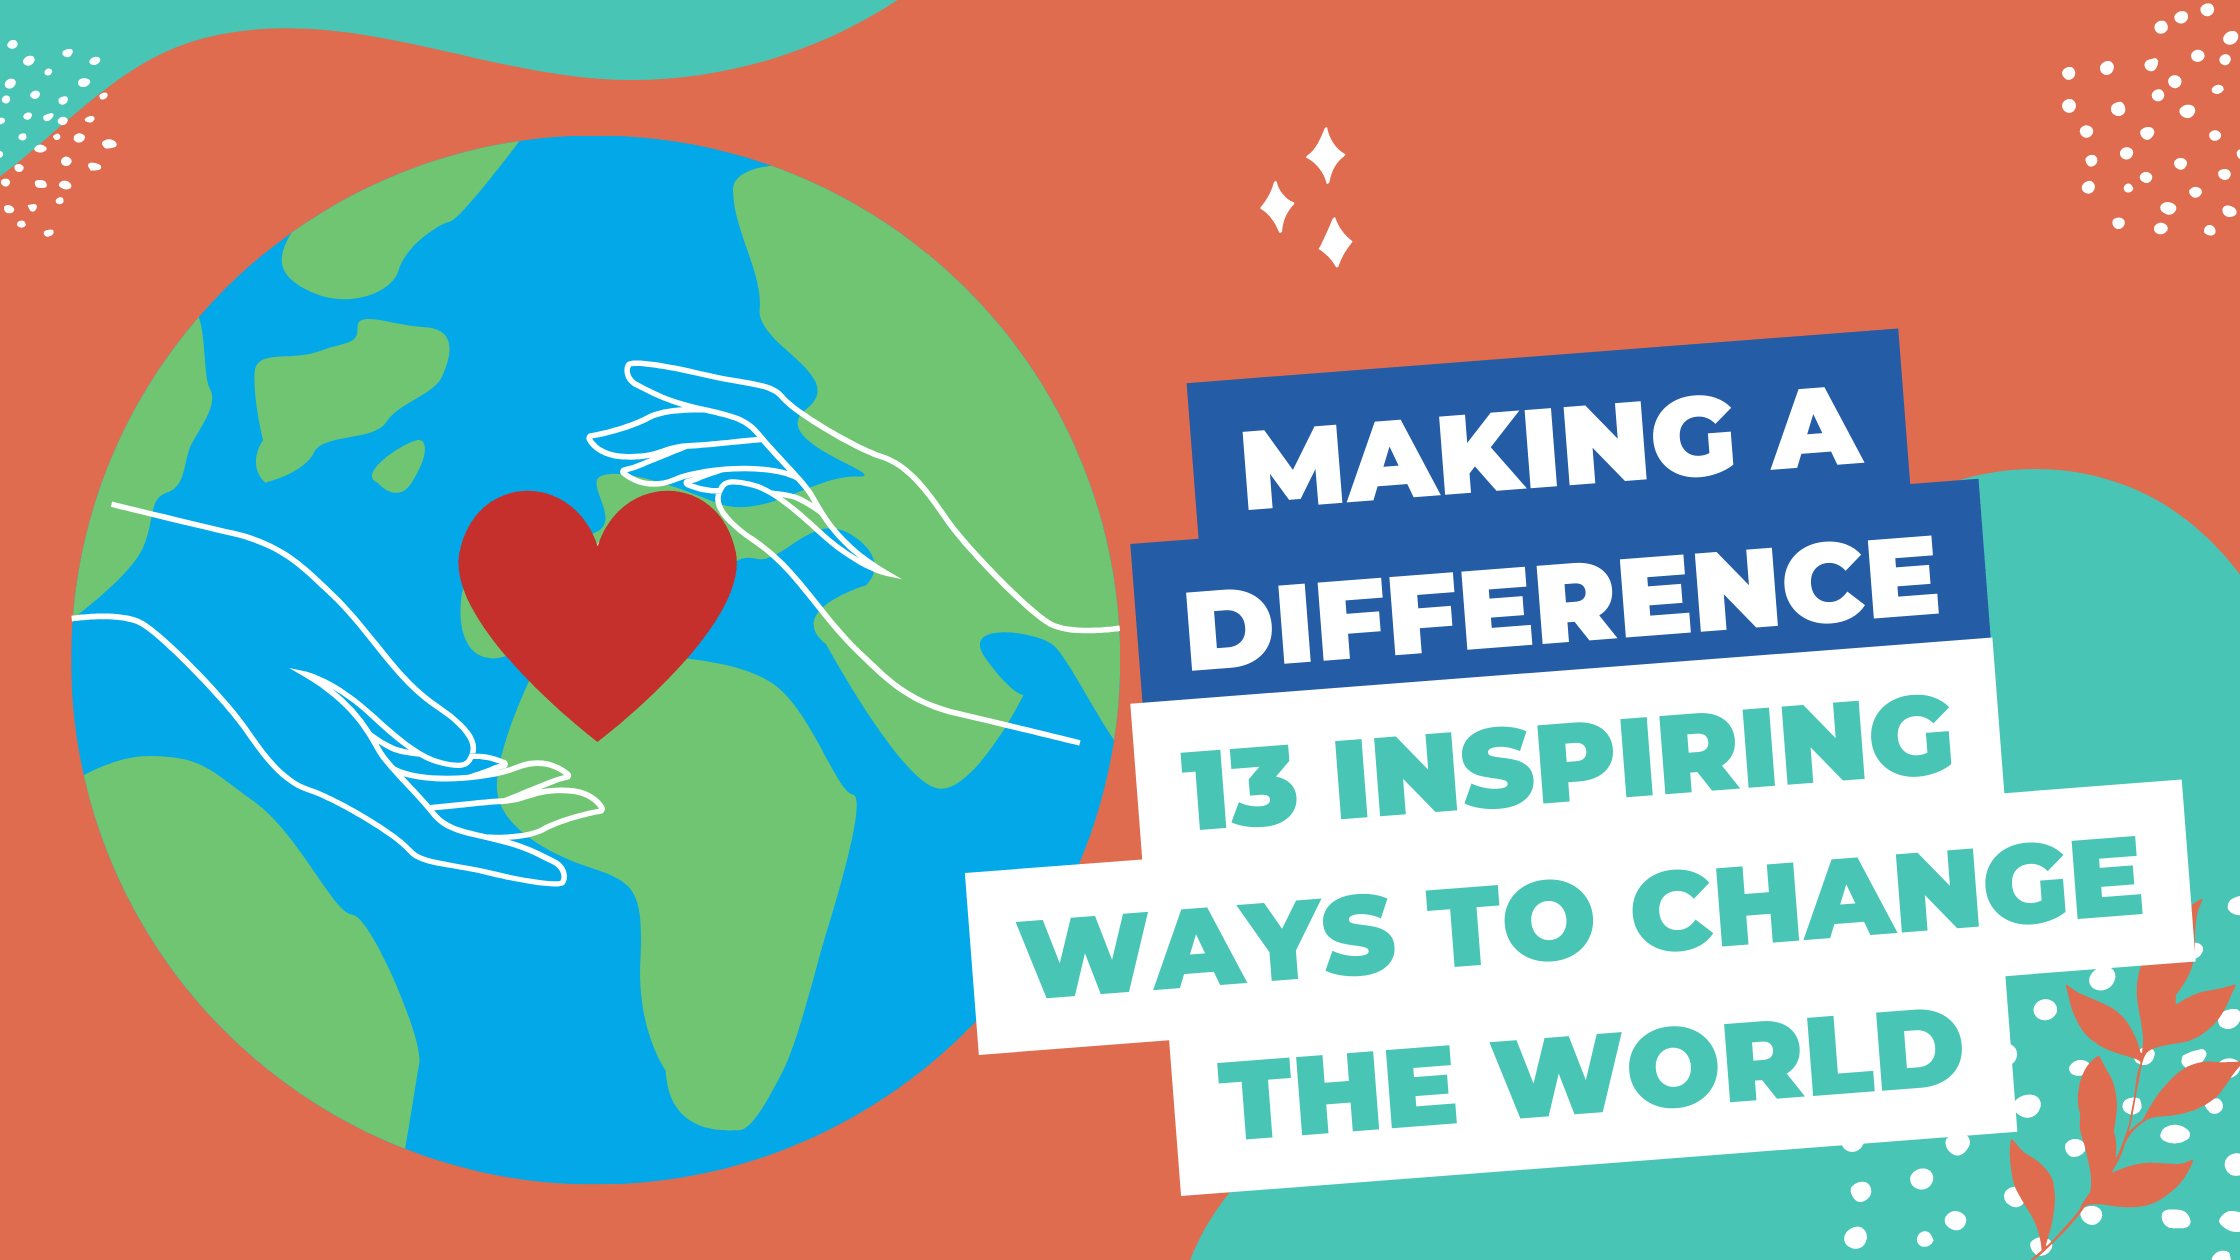 Making a Difference: 13 Inspiring Ways to Change the World